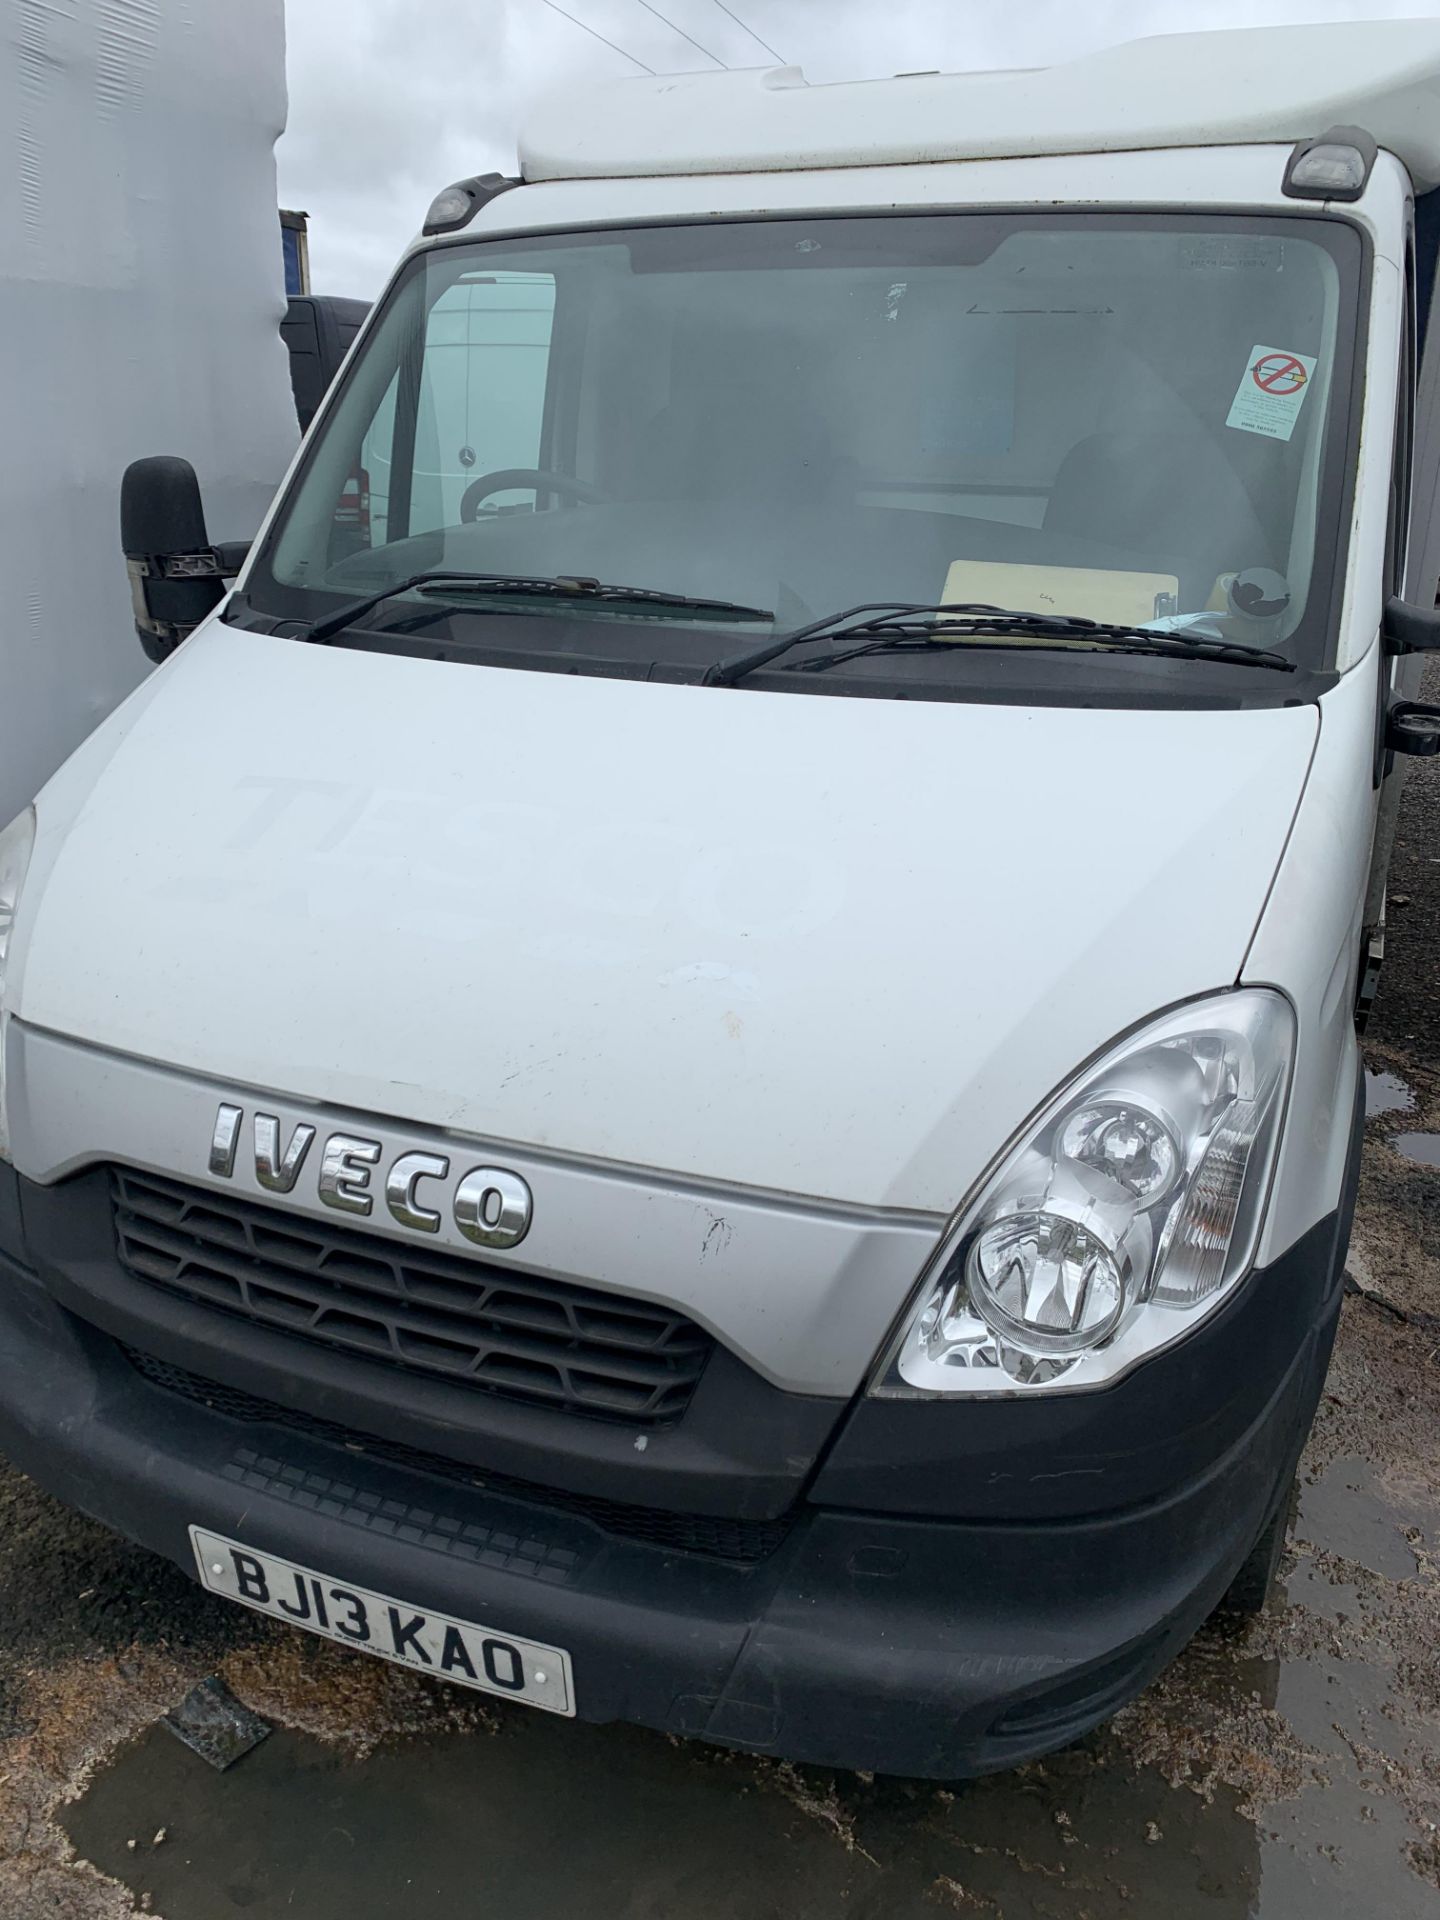 BJ13 KAO Iveco Daily 35S11 LWB refrigerated delivery van - ex Tesco 1st reg April 2013, 3 former